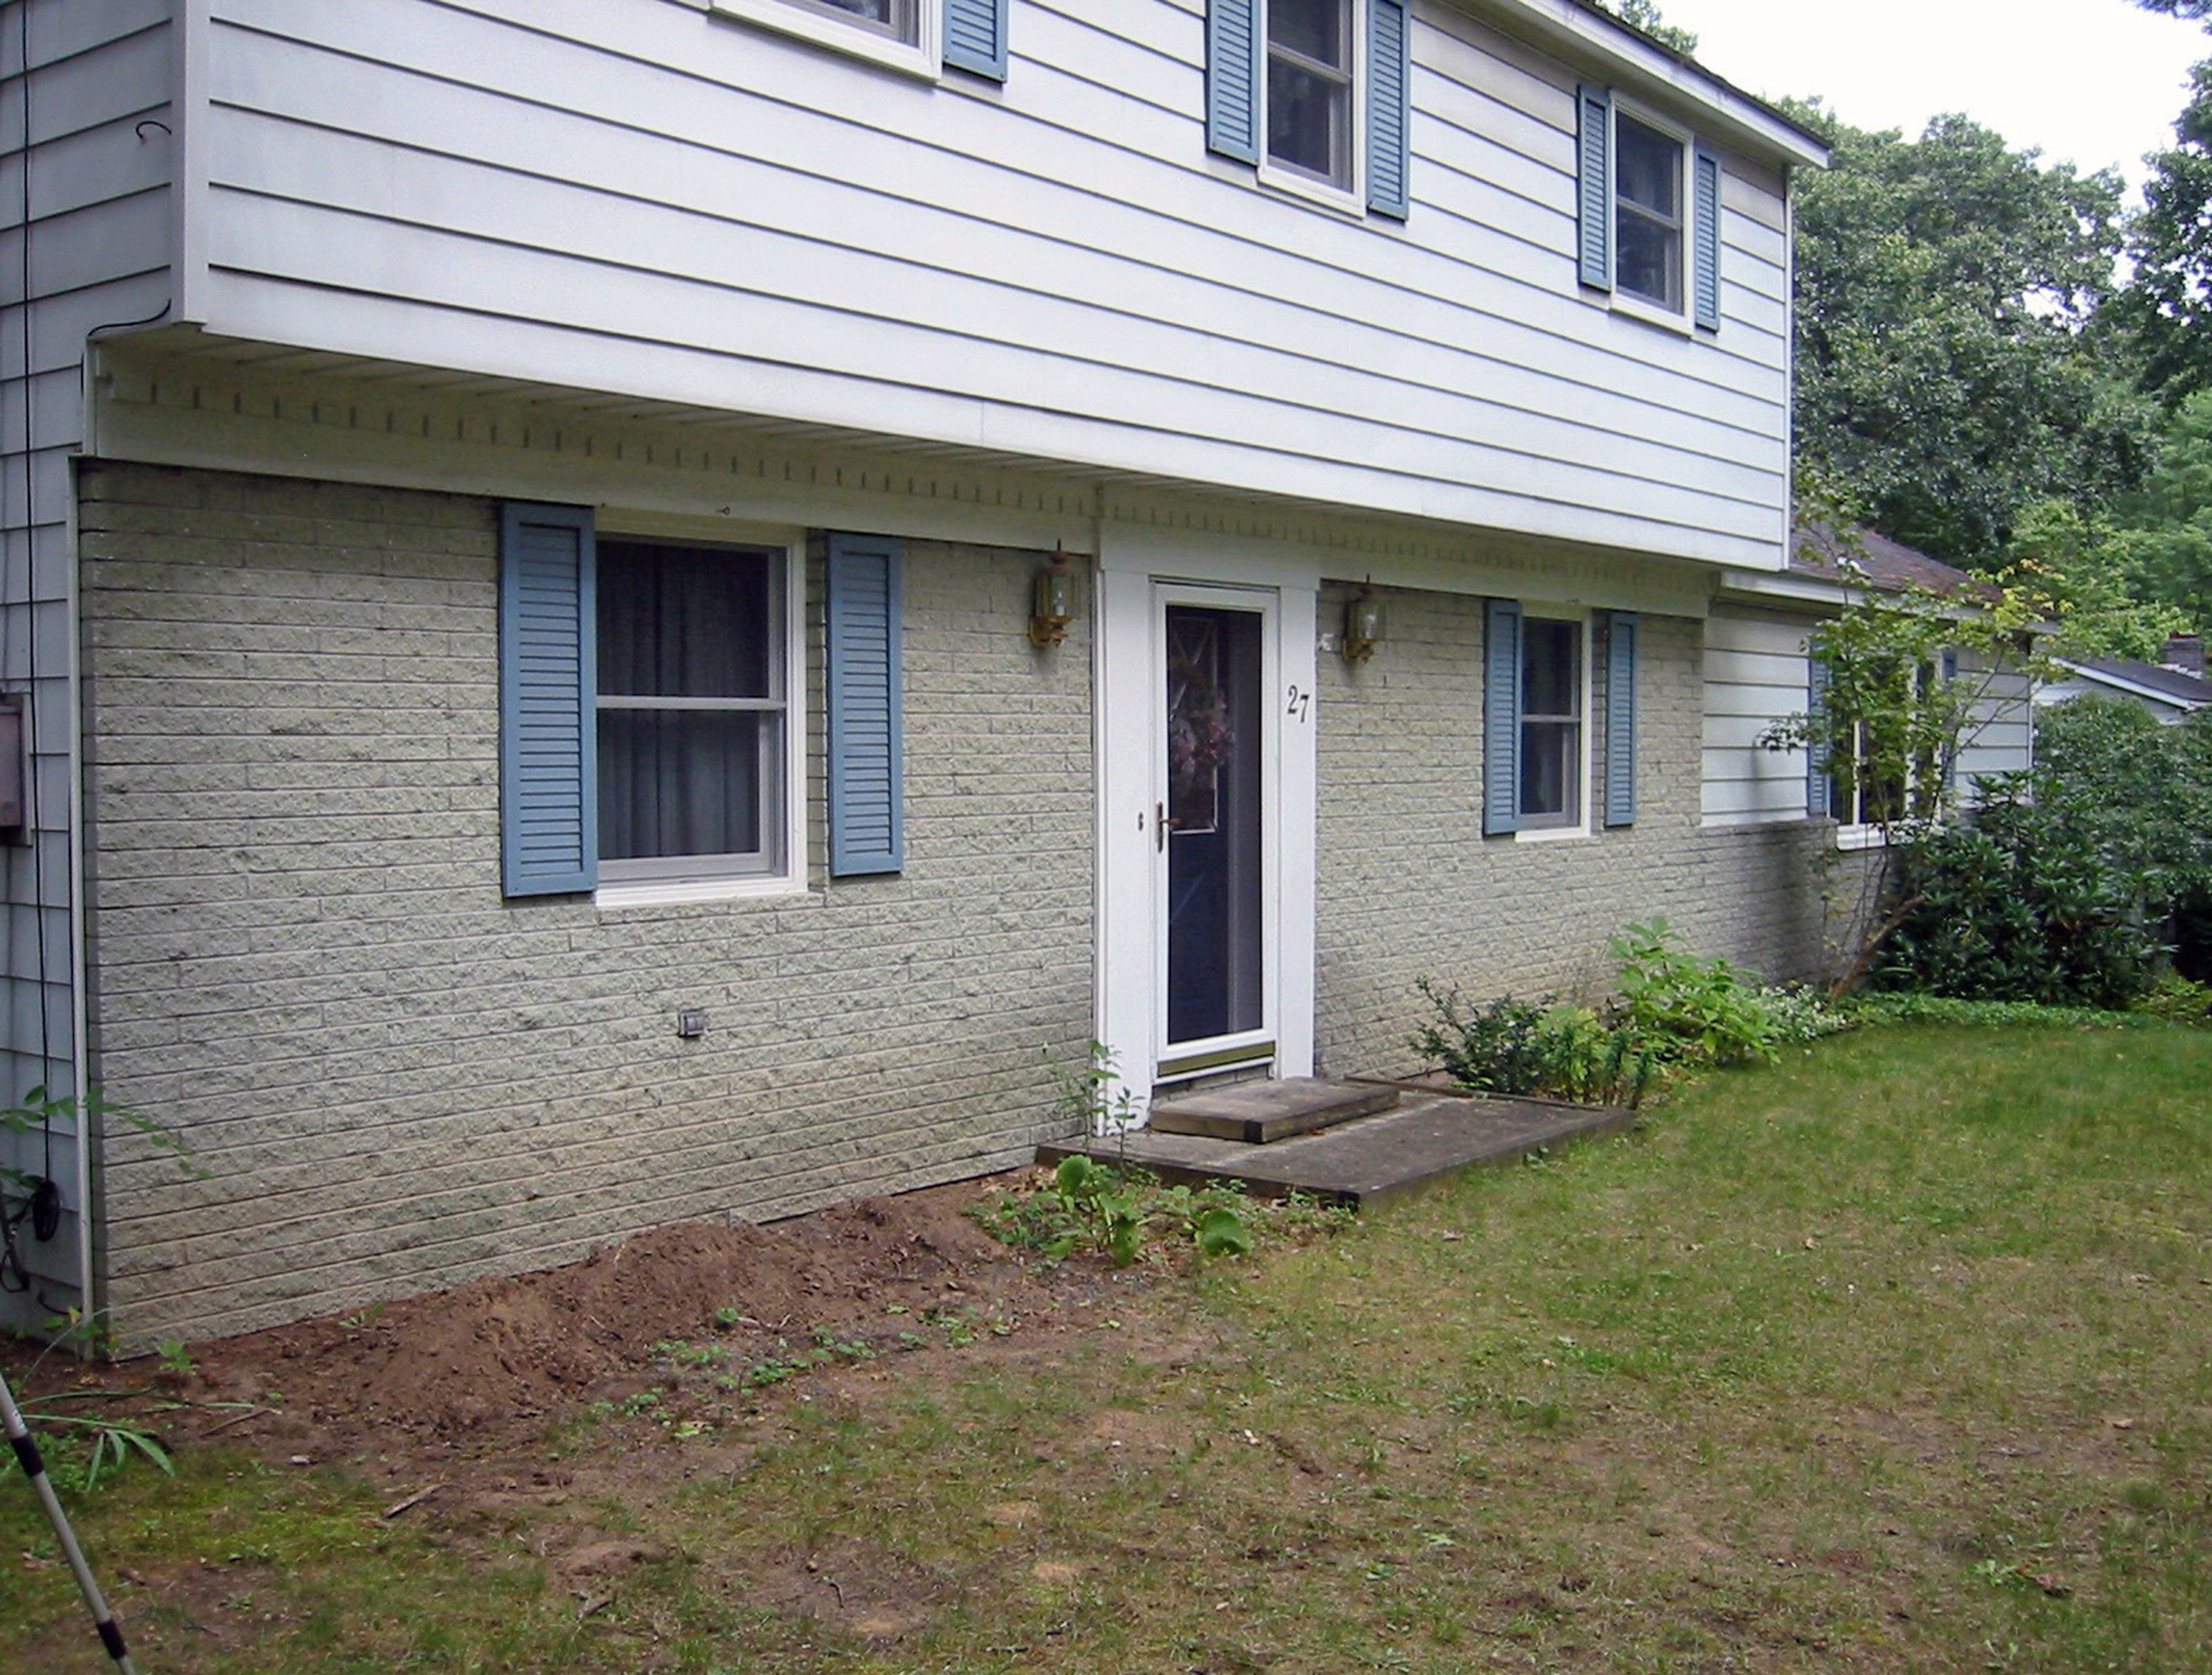 Before image of front yard with no landscaping